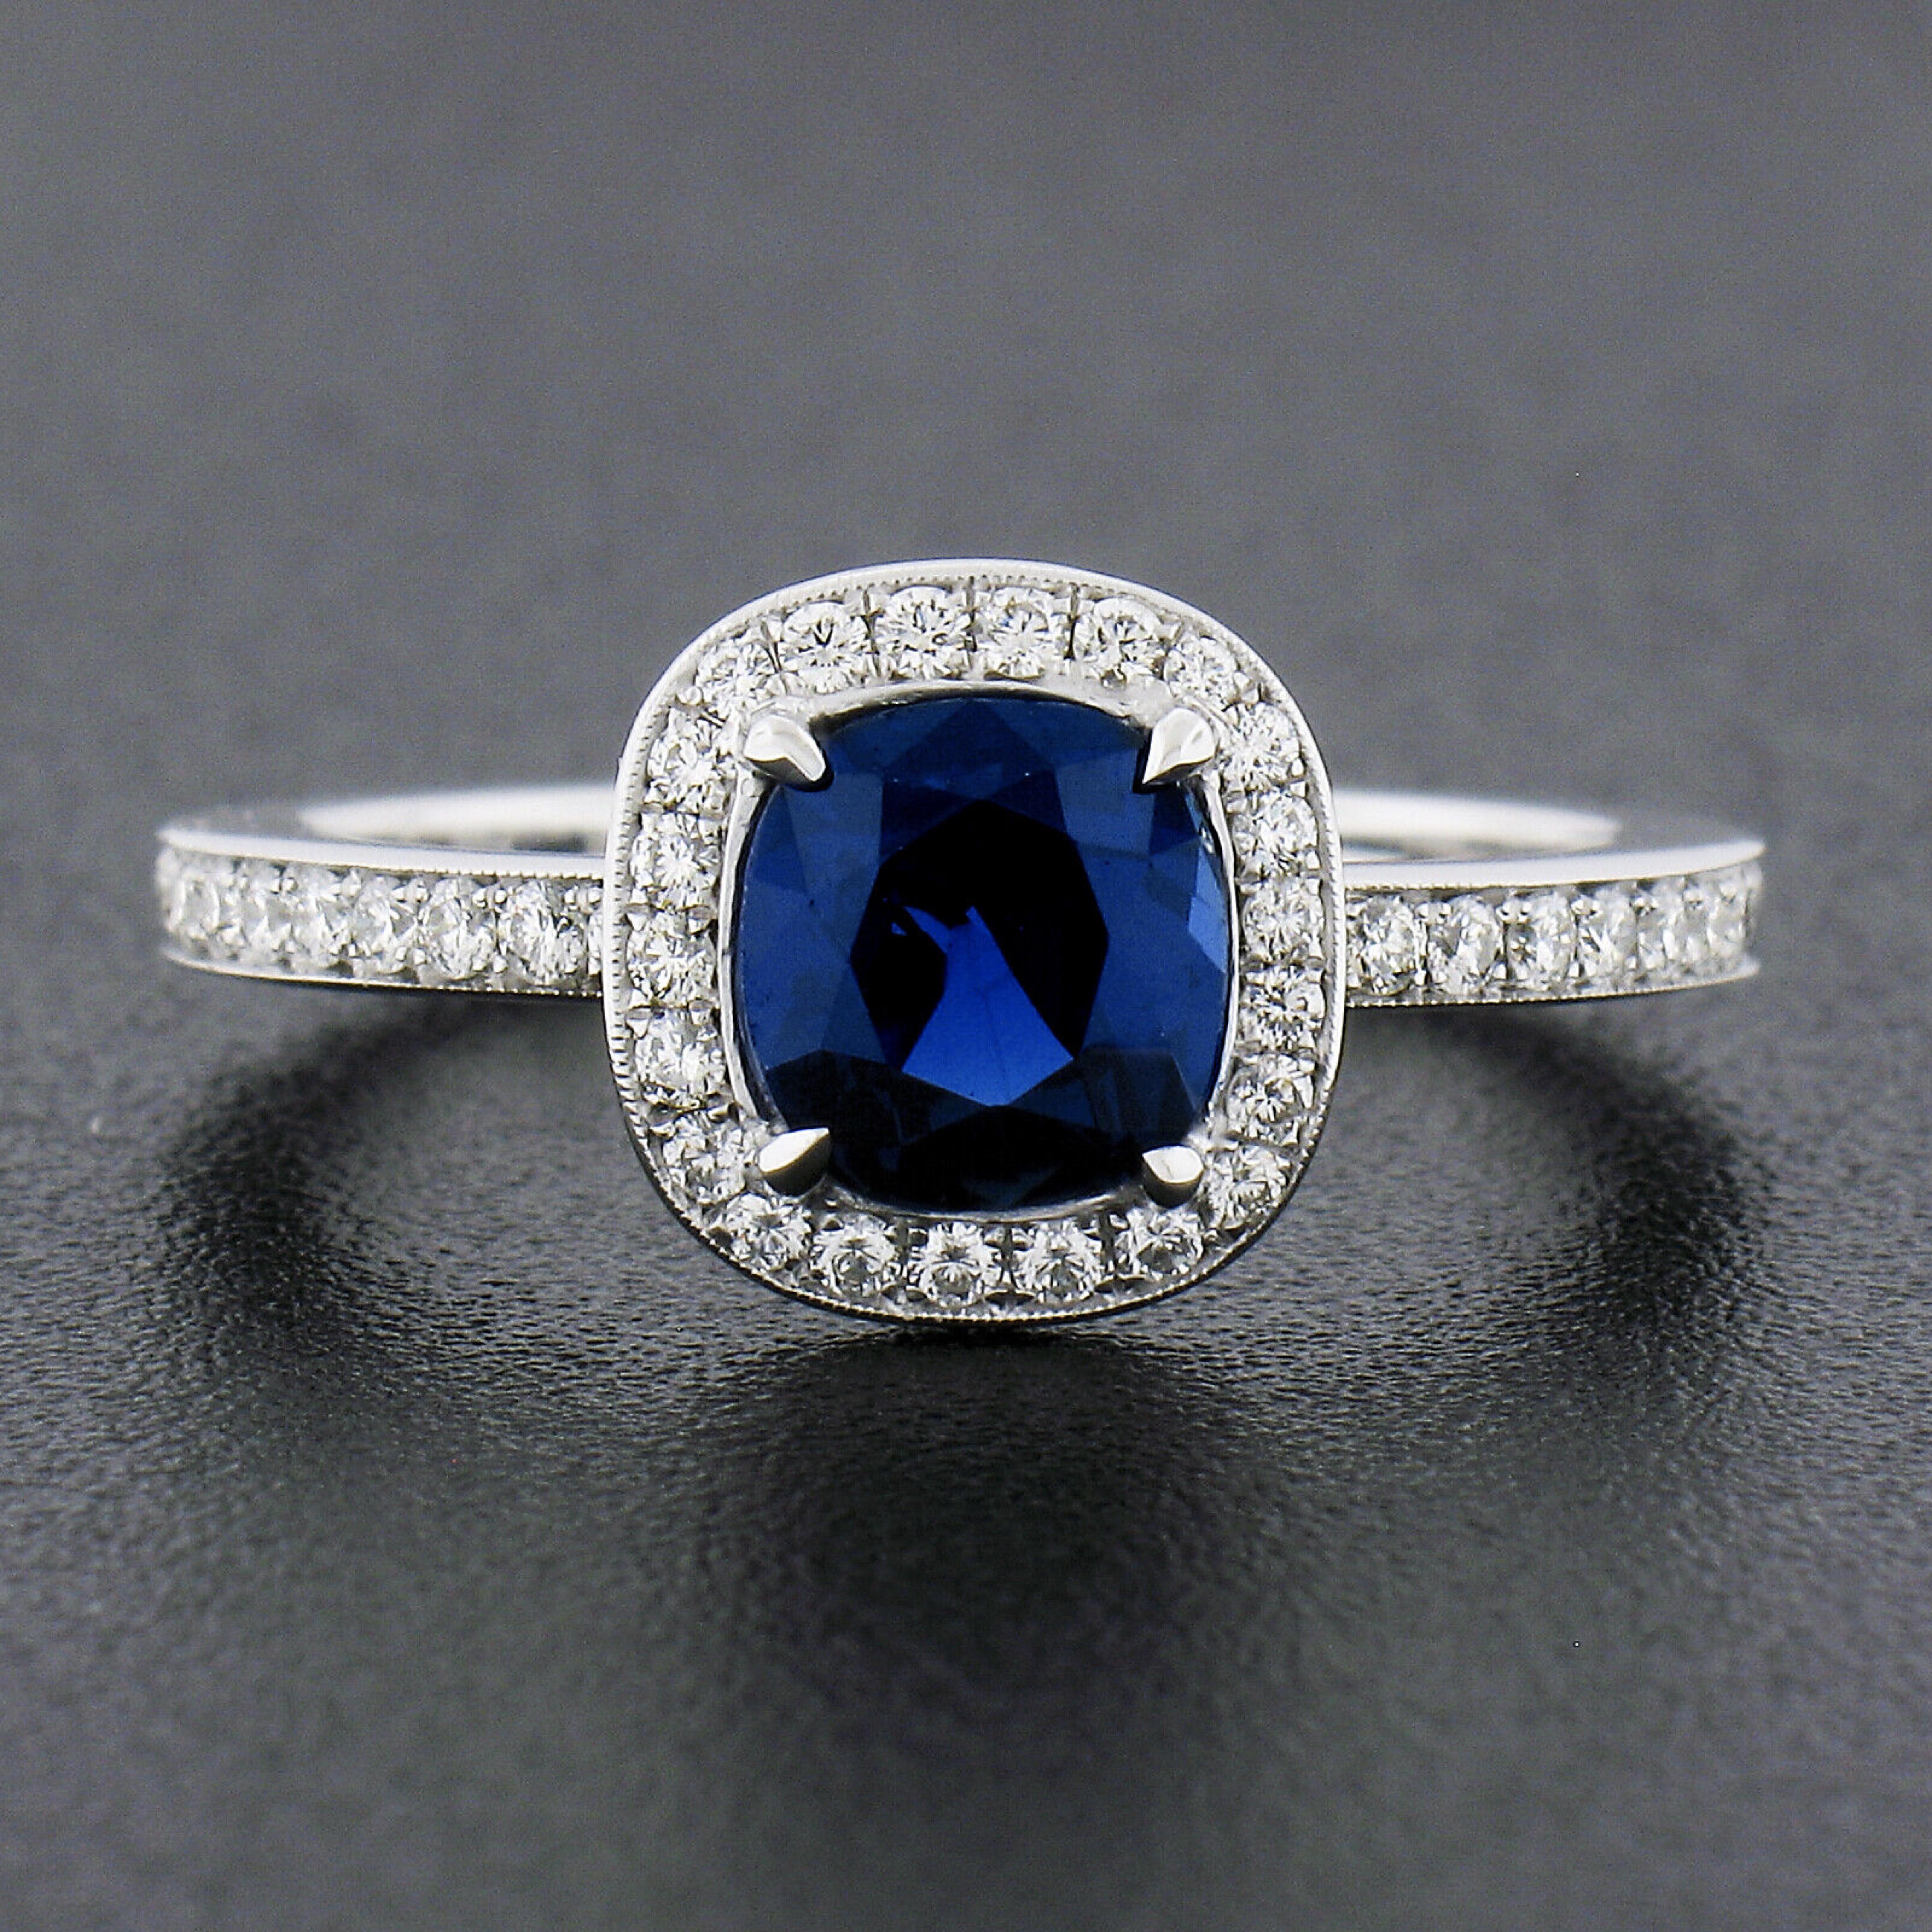 This gorgeous and fiery sapphire and diamond ring was crafted in solid platinum and features a stunning, GIA certified, natural genuine sapphire solitaire neatly prong set at the center of a brilliant diamond halo. This cushion cut sapphire has a